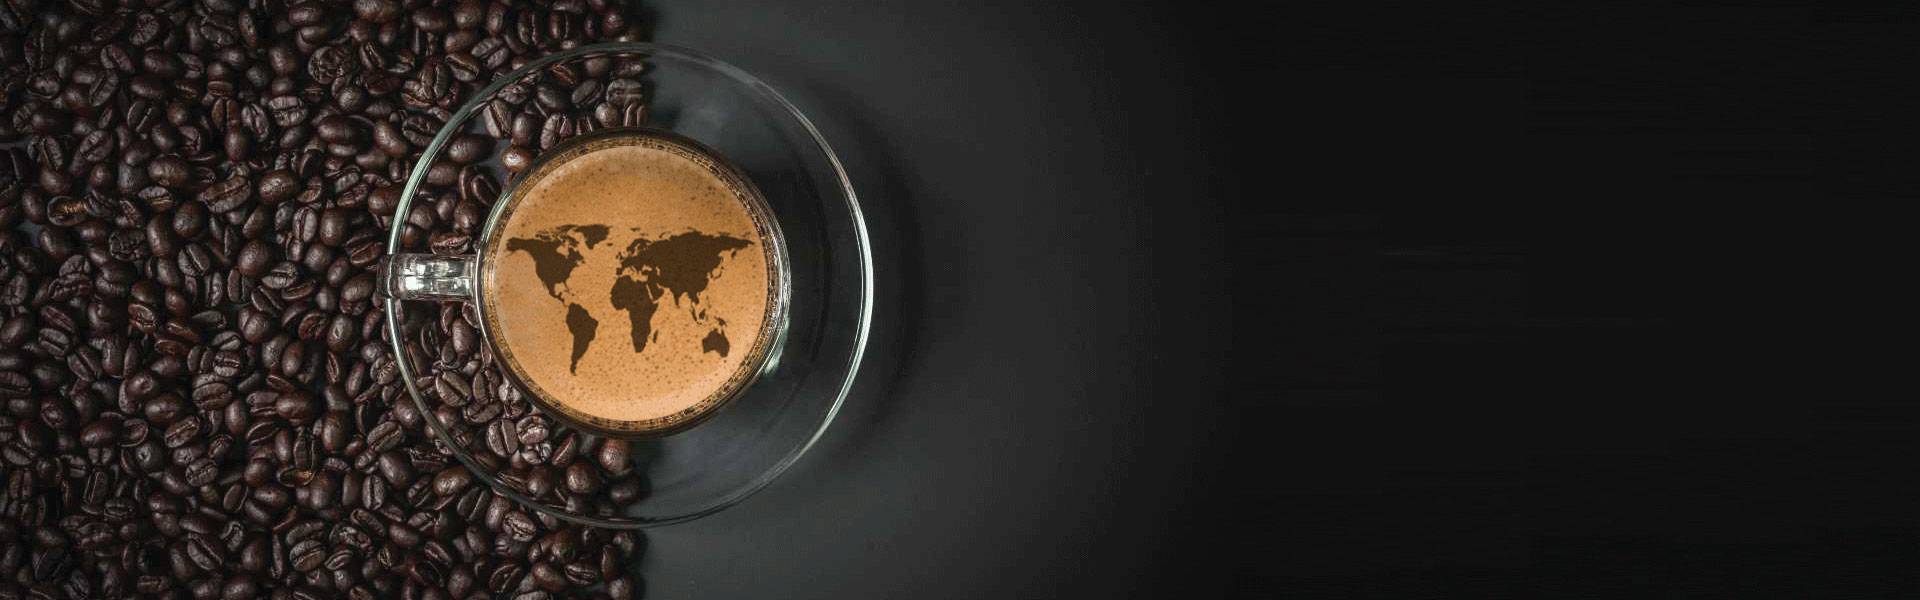 Main sl e 1.2 1 The world in a coffee bean. With the fascination for  the world of coffee beans we treat coffee with the  greatest respect.